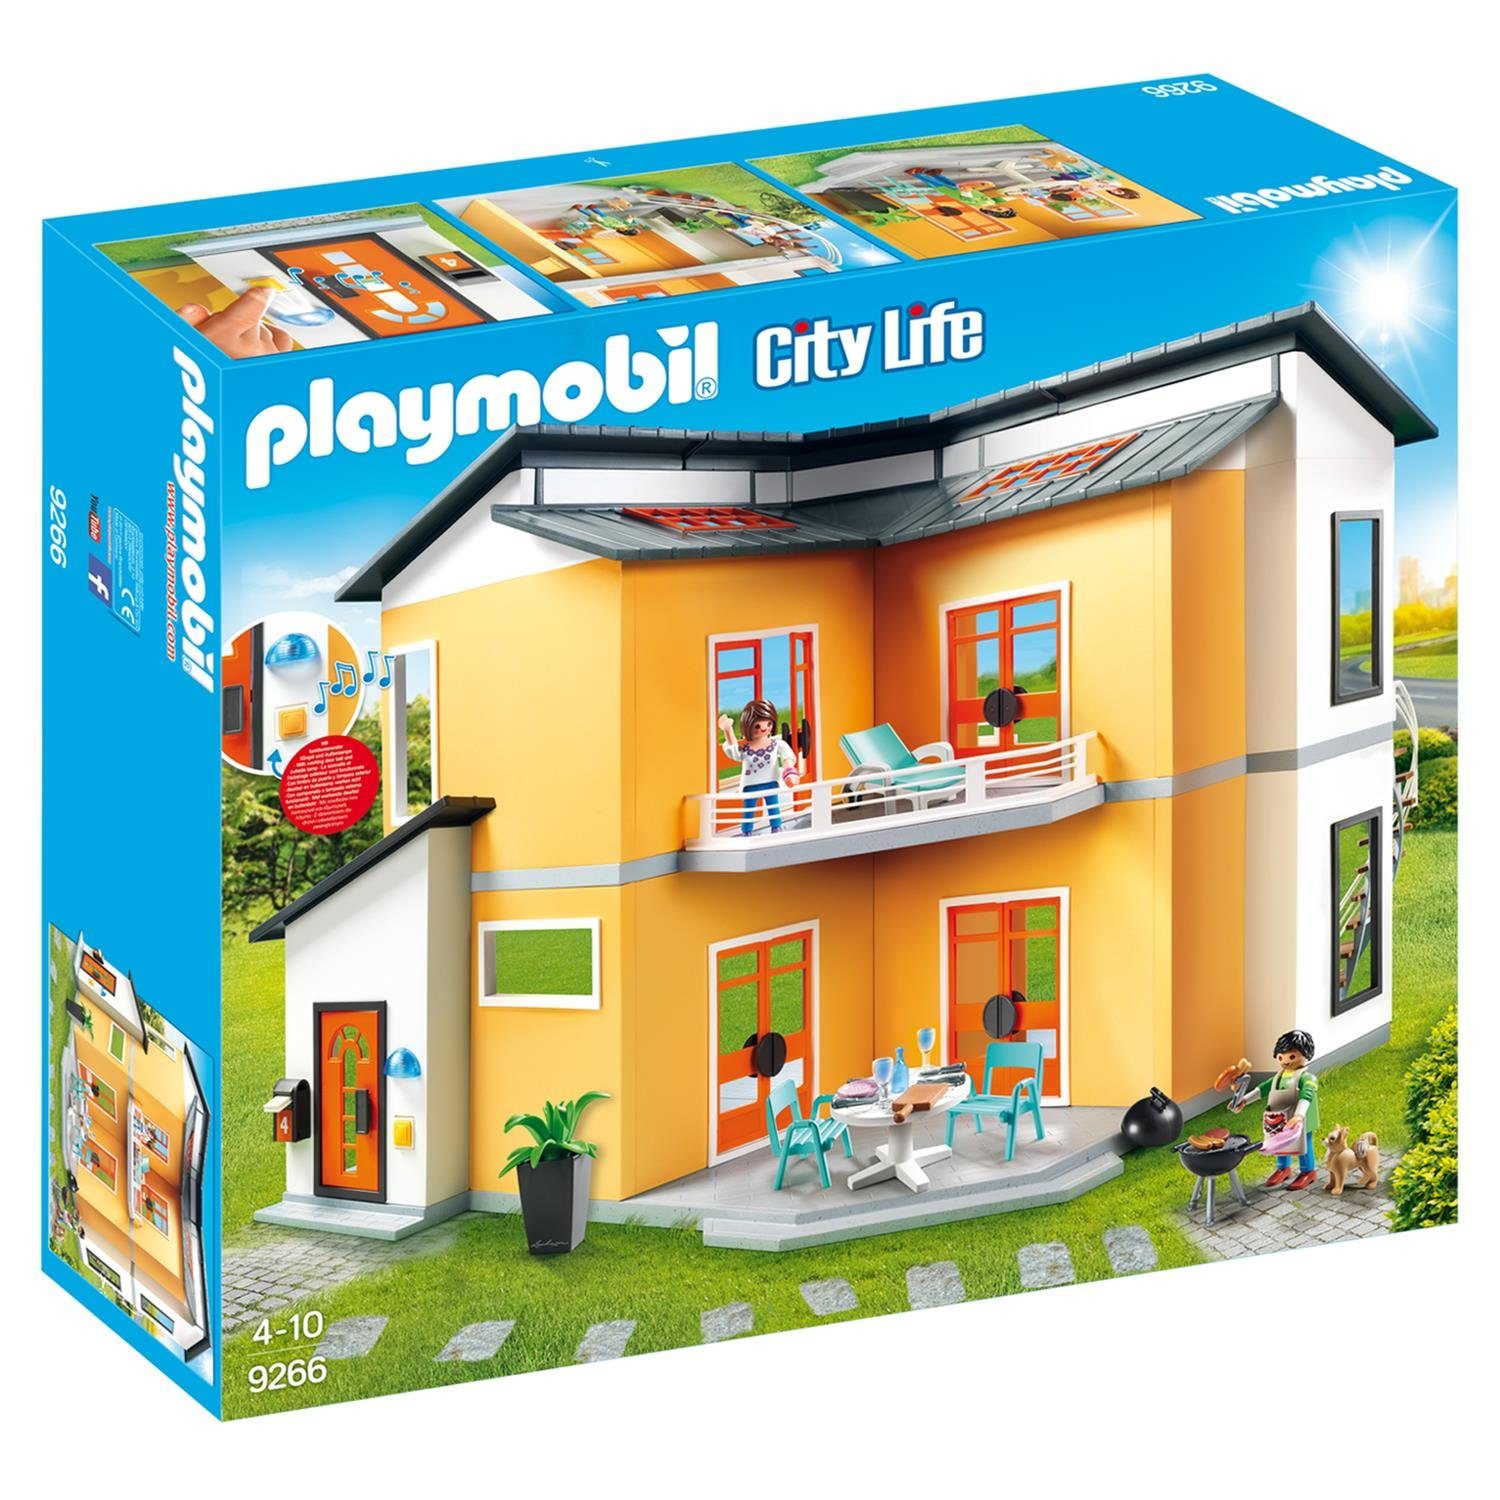 Playmobil® Konstruktions-Spielset Modernes Wohnhaus (9266), City Life, Made  in Germany